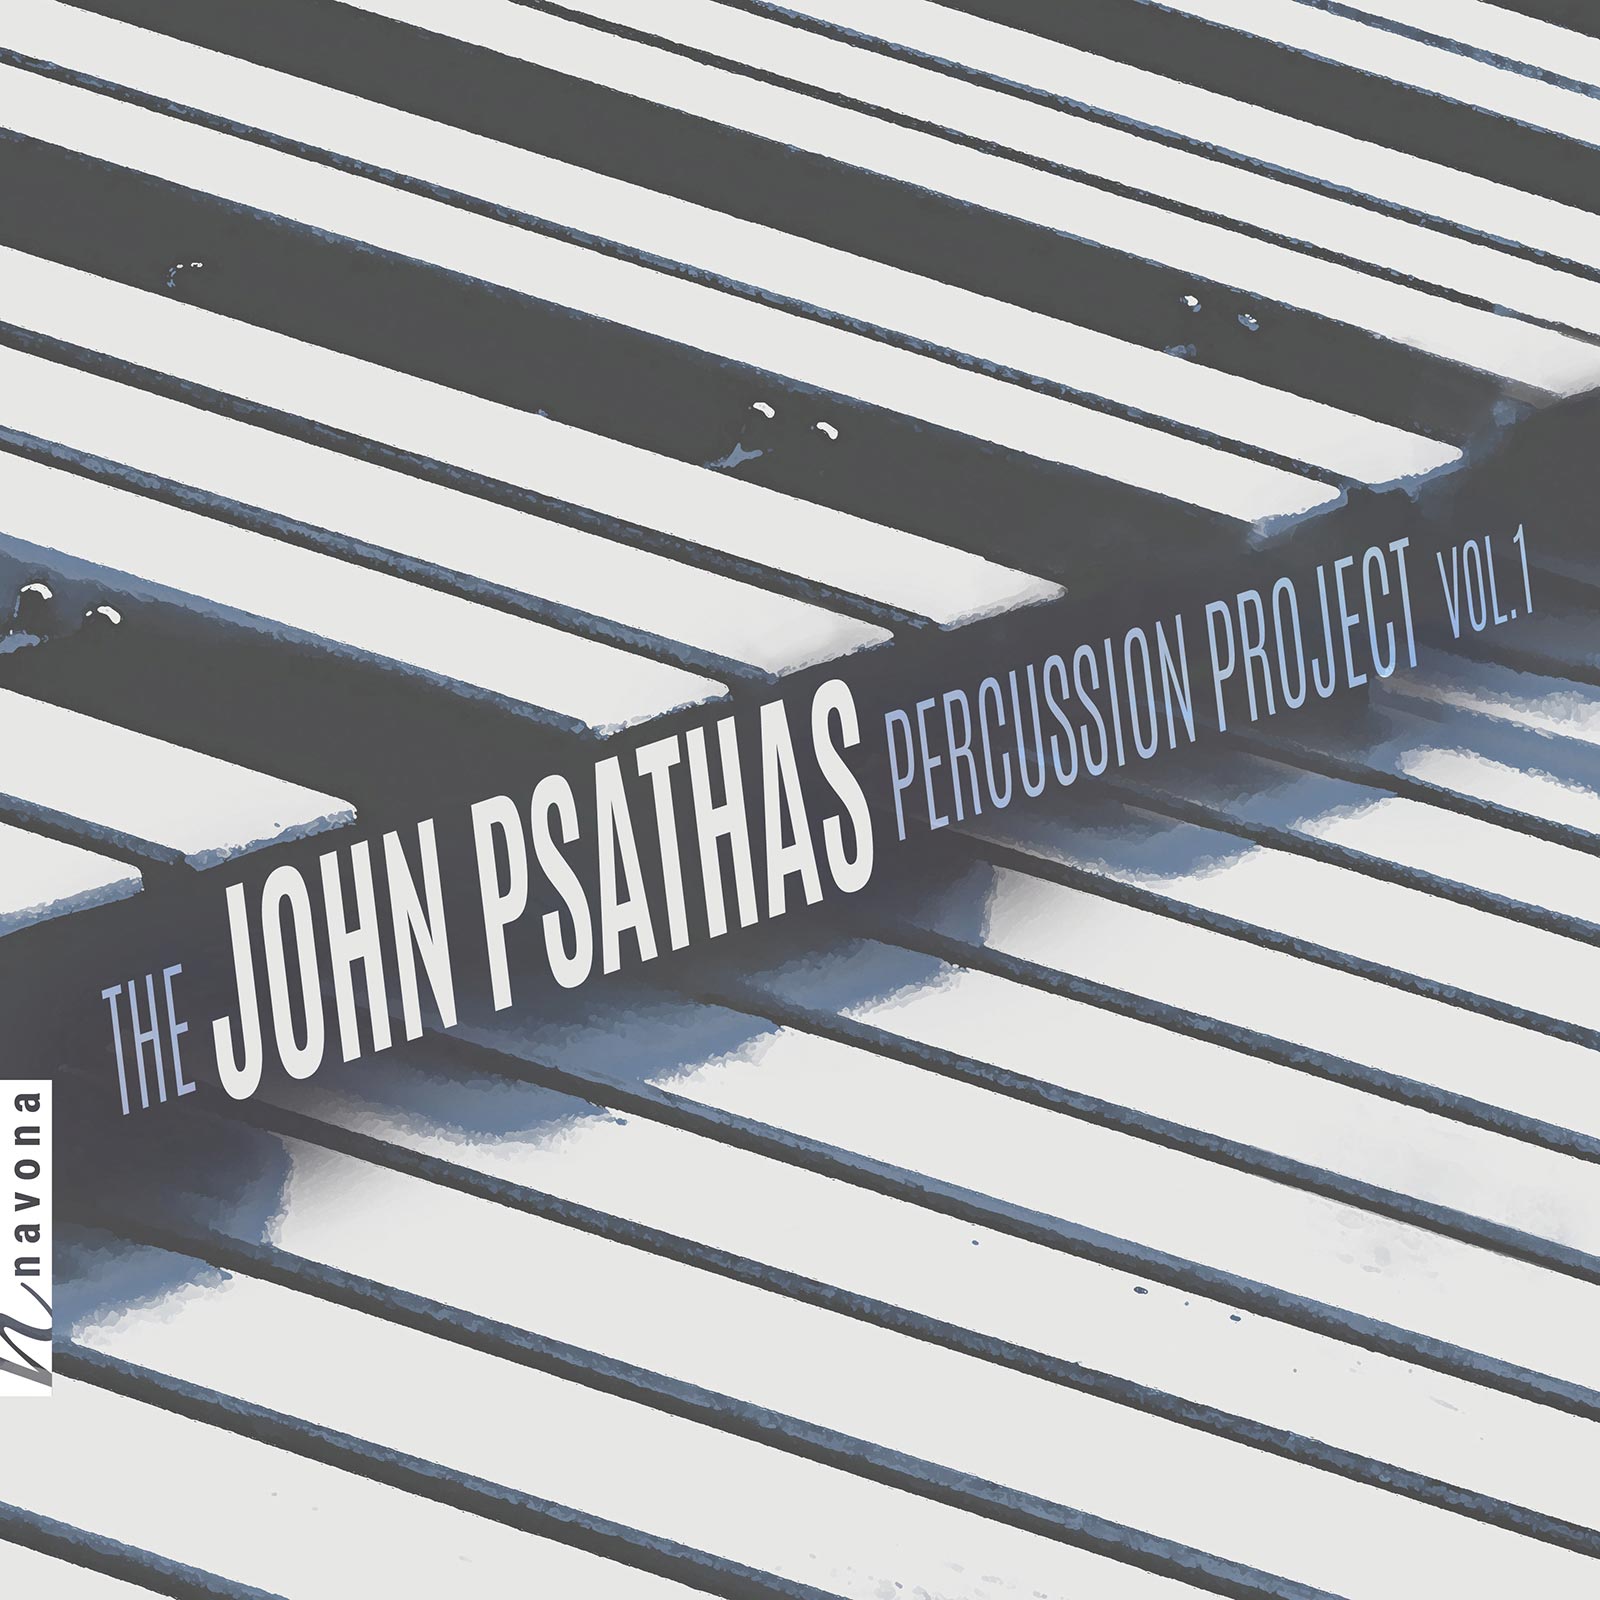 The John Psathas Percussion Project Vol. 1